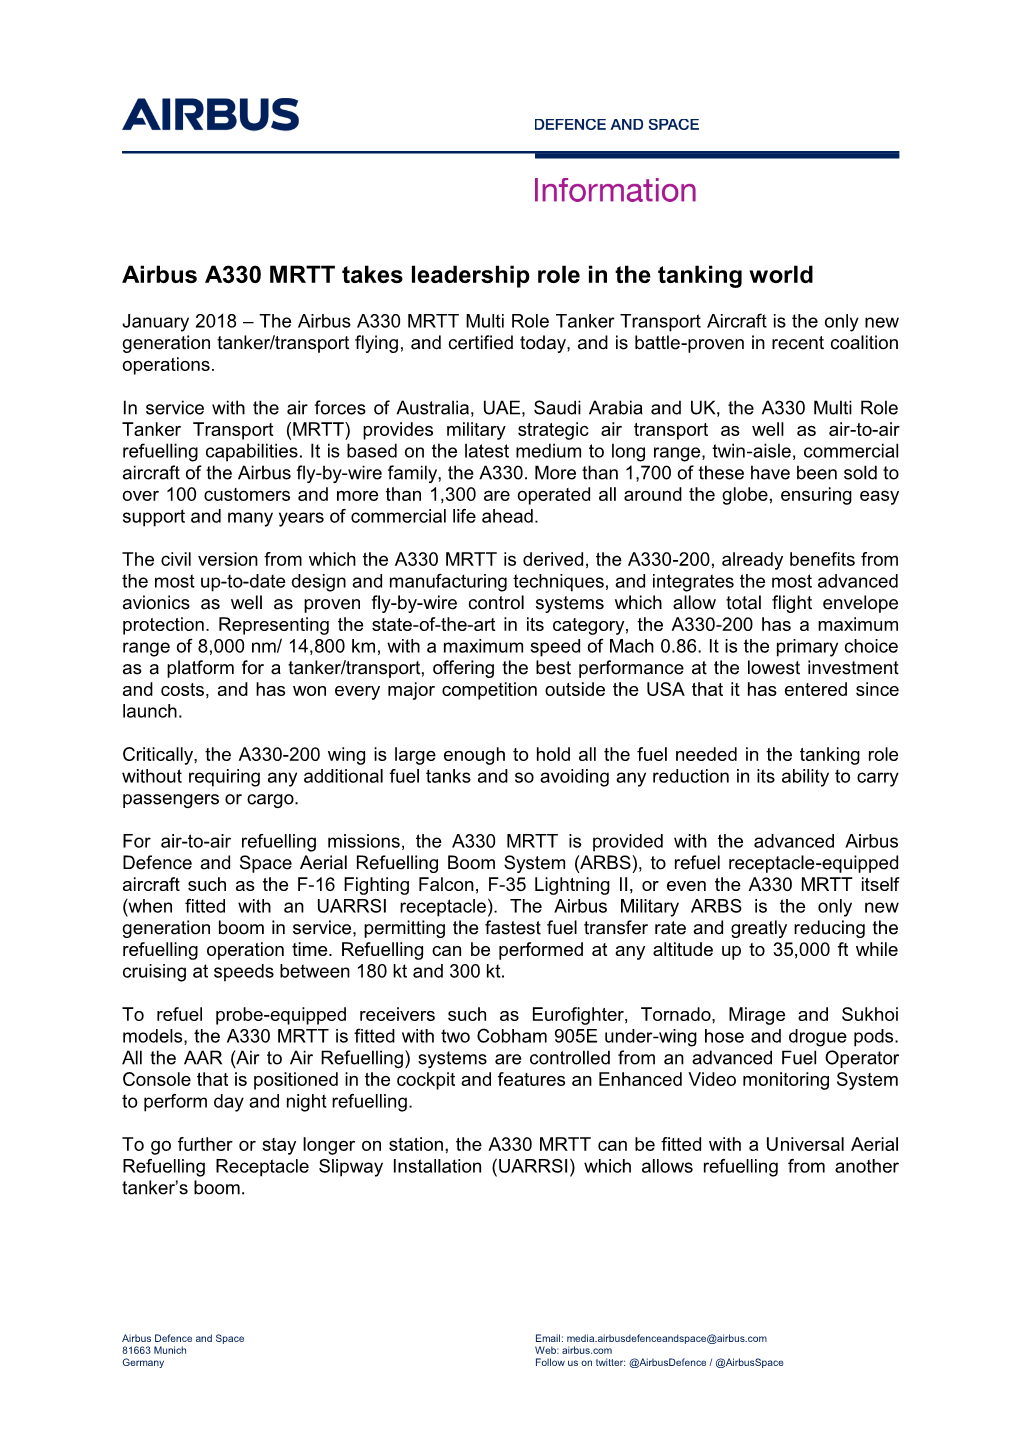 Airbus A330 MRTT Takes Leadership Role in the Tanking World